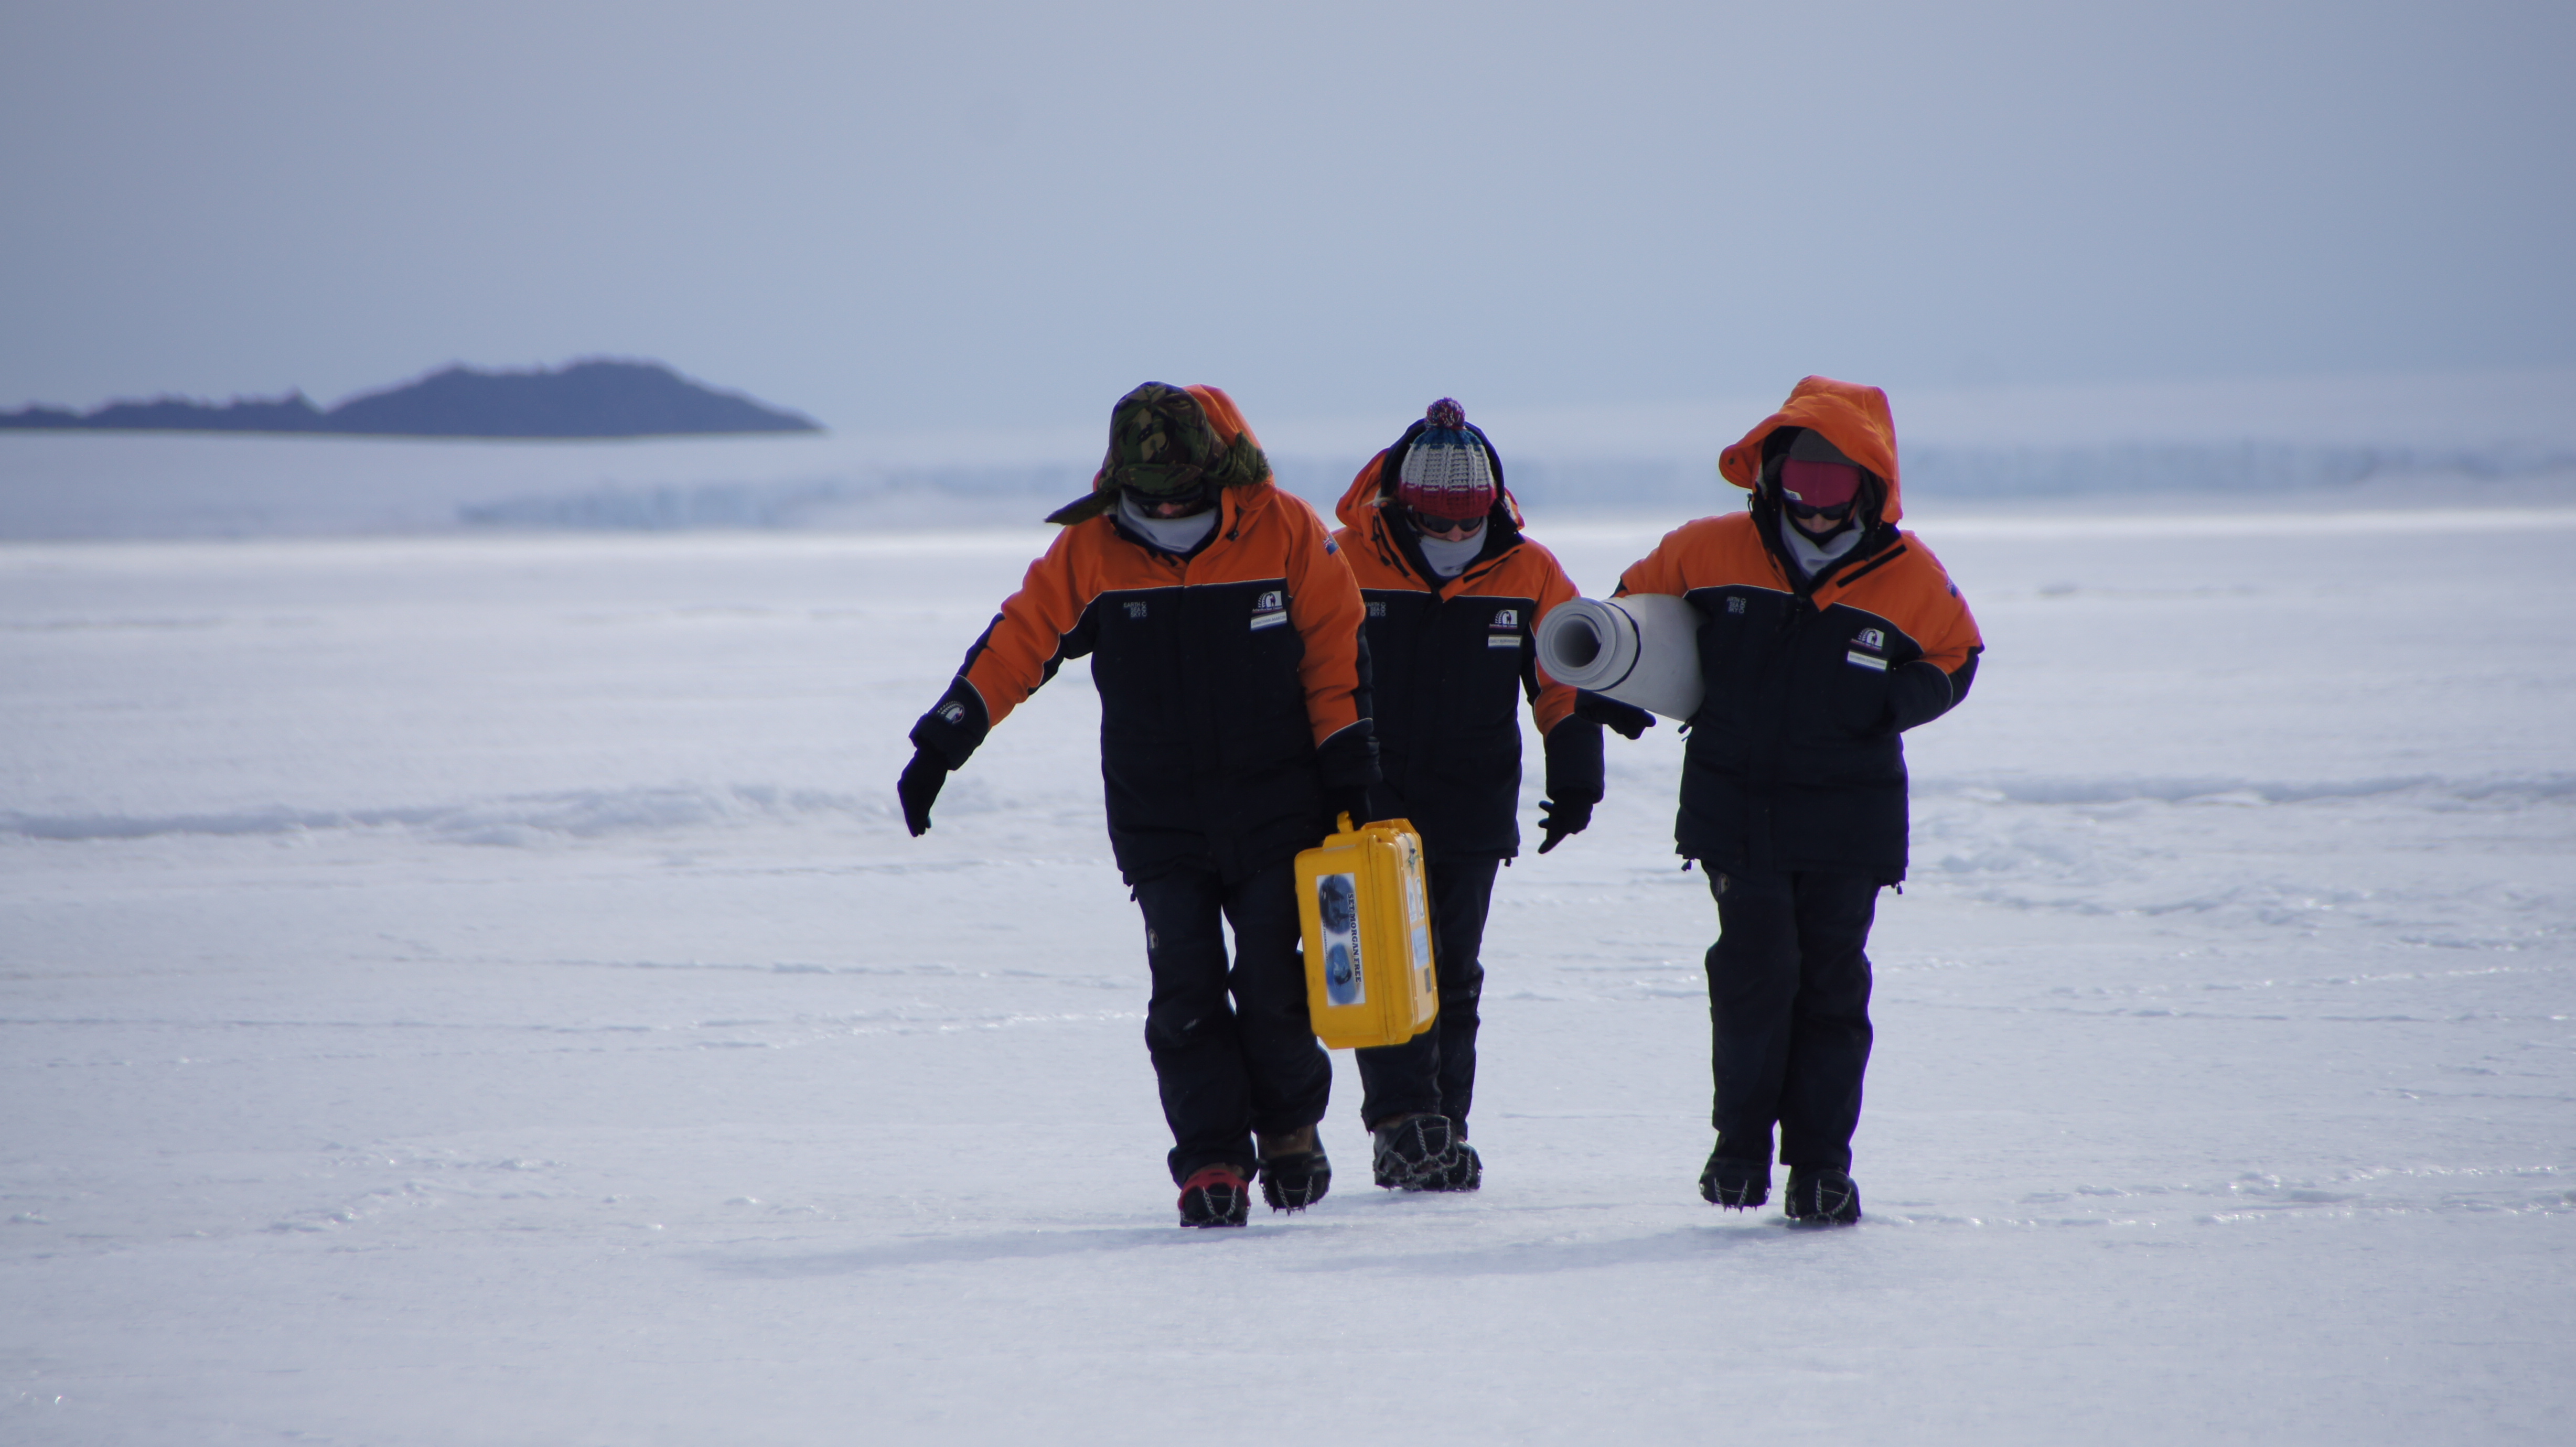 PCAS students heading out on the ice shelf with hydrophone gear, following screening of Blackfish (photo: Dr Ursula Rack)